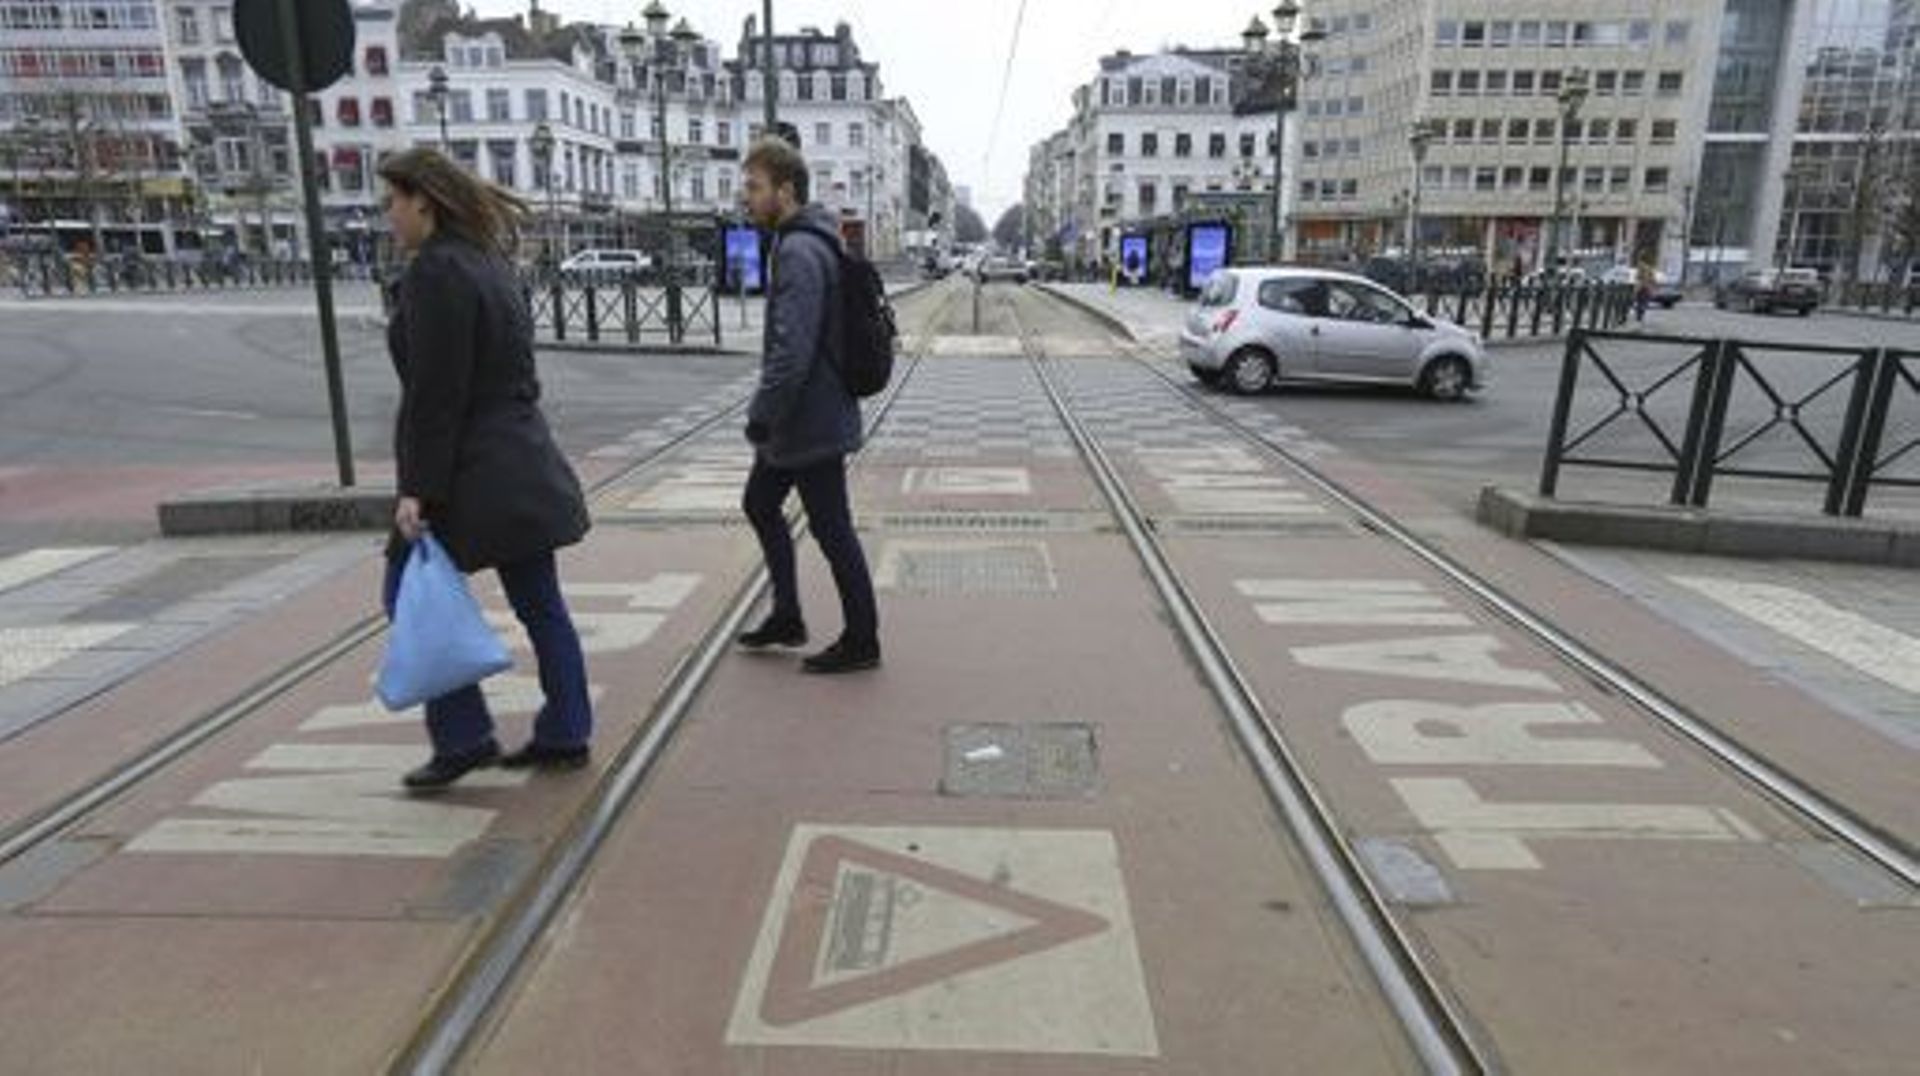 Illustration shows empty tramway tracks pictured on the Louise Louiza avenue as public transports in Brussels are on strike following a call of several unions (CGSP-ACOD and CGSLB-ACLVB), Monday 19 February 2018. BELGA PHOTO NICOLAS MAETERLINCK